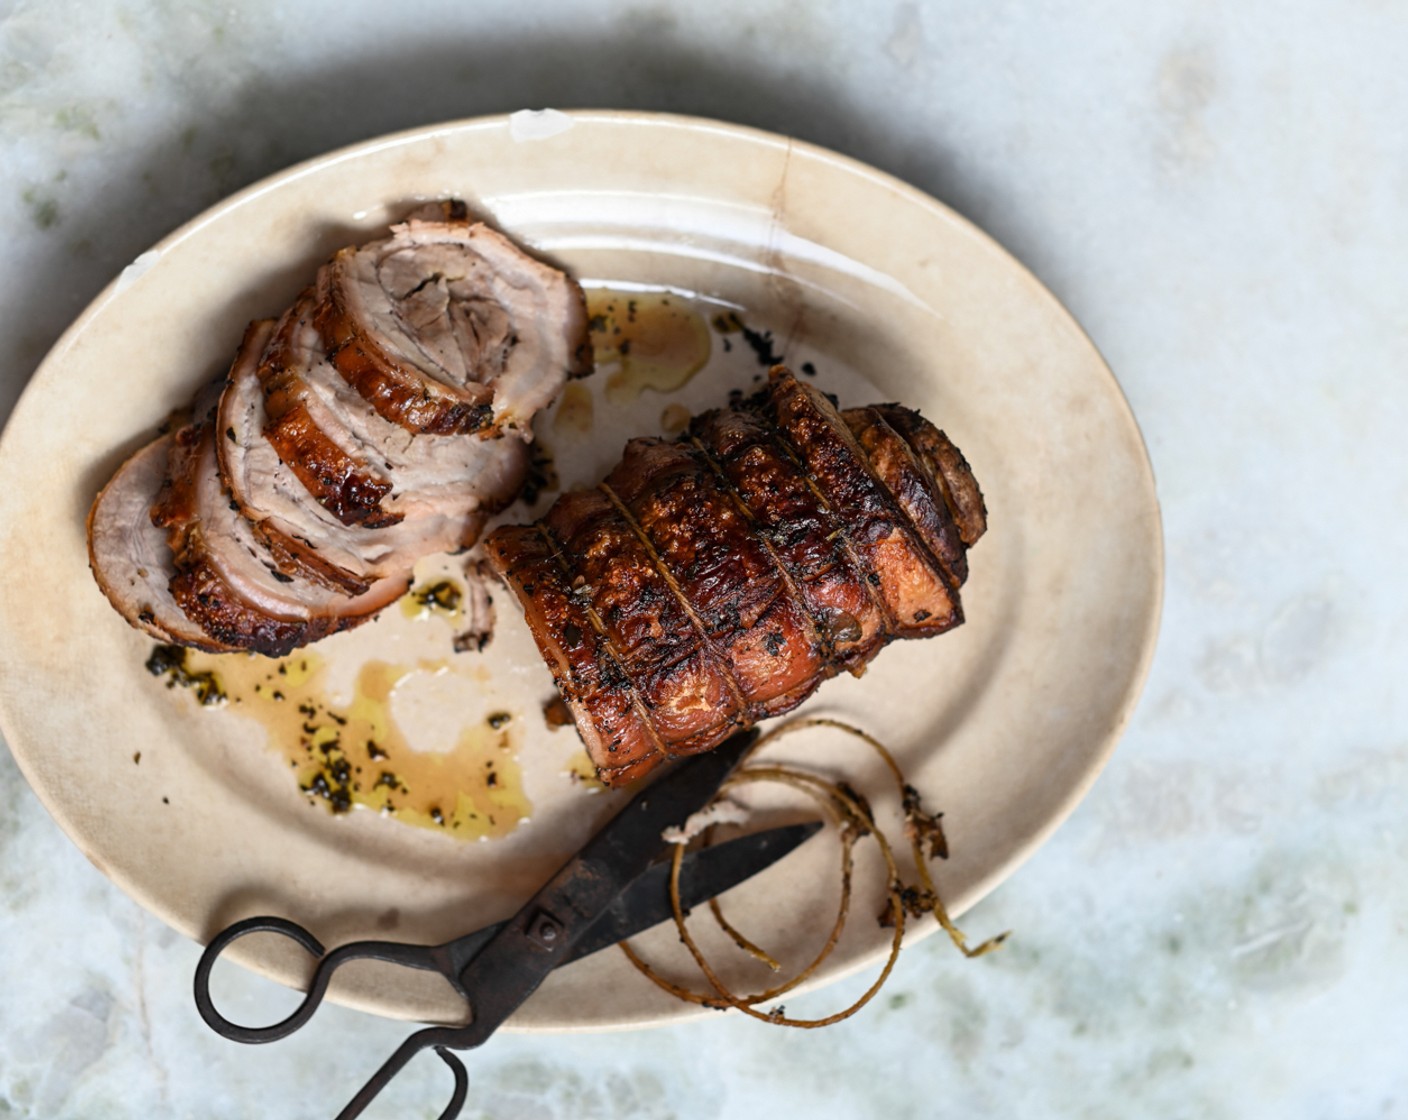 step 10 For extra crispy skin, give the porchetta a quick blast under the grill, turning once. Rest the pork for 5-10 minutes before slicing.